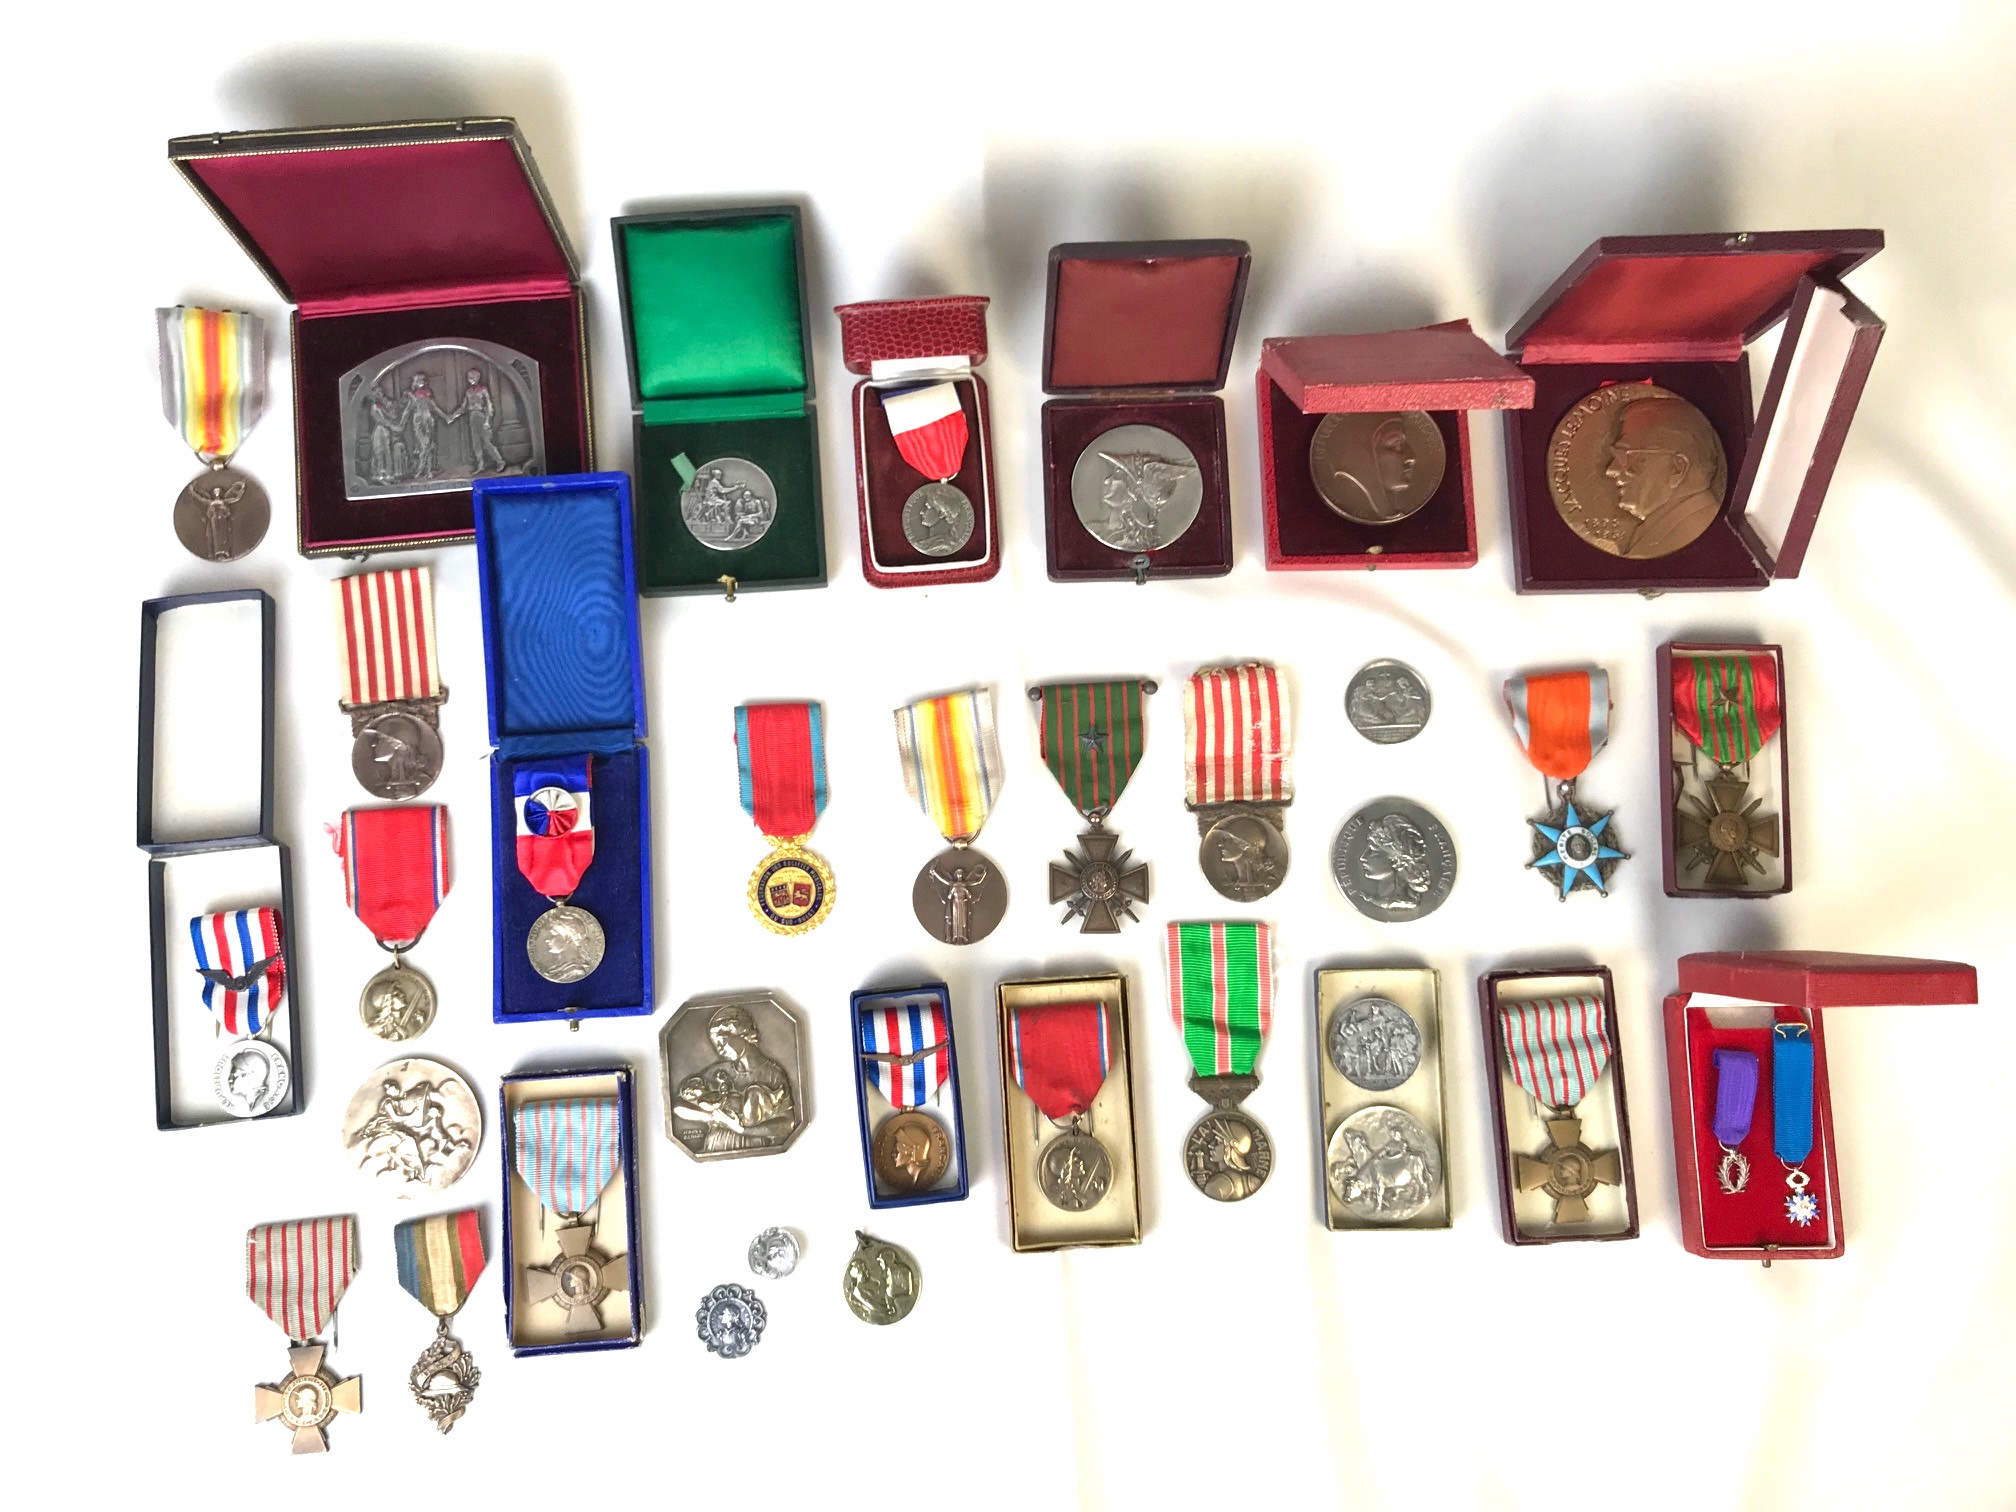 GROUP OF 35 EUROPEAN MEDALS MISCELLANEOUS